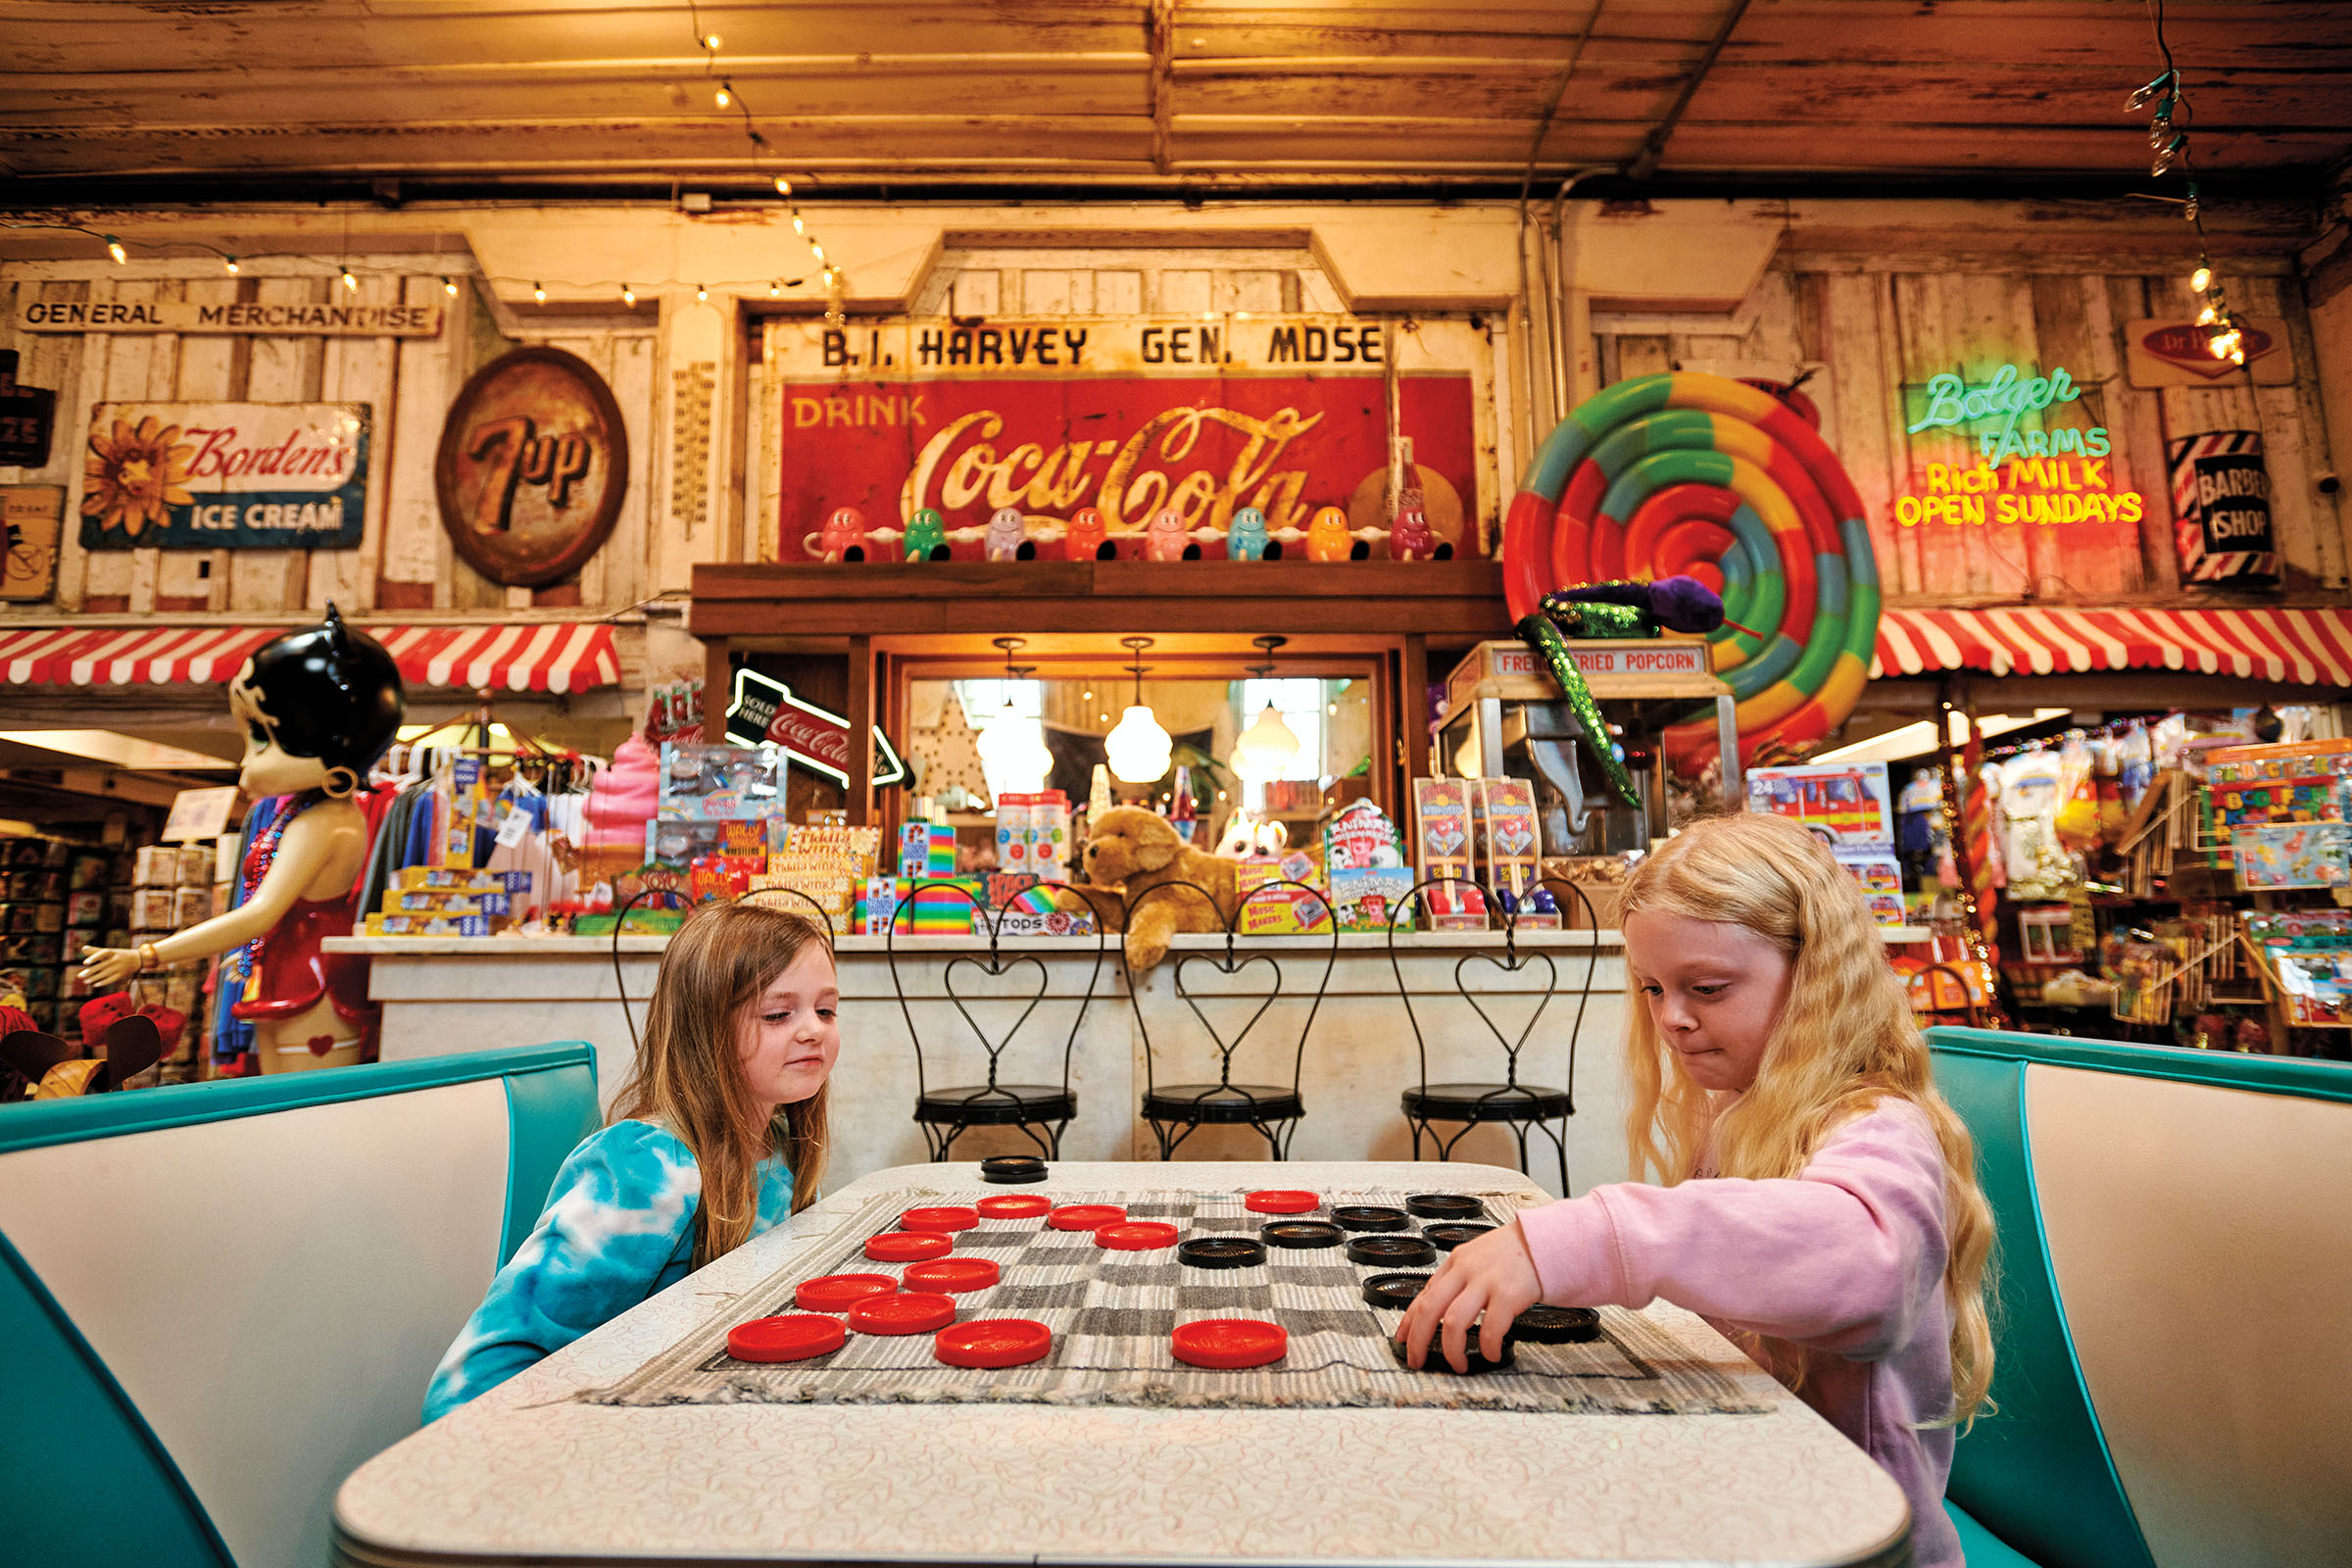 Two young women play checkers at a table in front of a brightly decorated store featuring a vintage Coca-Cola sign